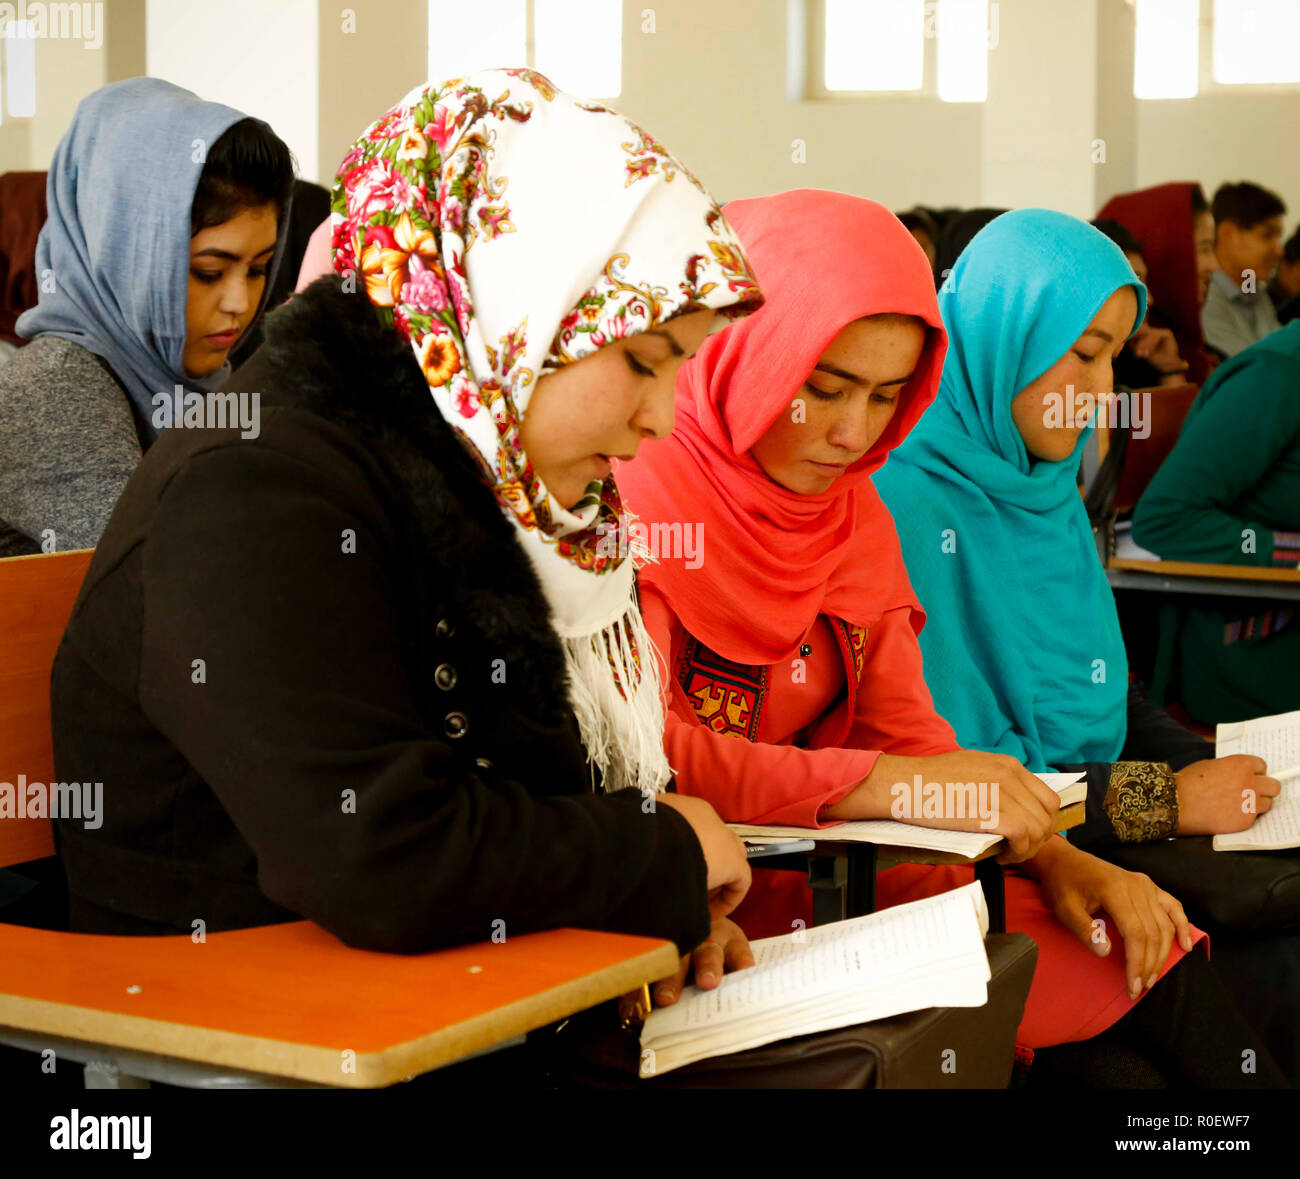 Bamiyan, Afghanistan. 4th Nov, 2018. University students attend a class at Bamiyan University in Bamiyan province, central Afghanistan, Nov. 4, 2018. Established around two decades ago, but shut down by the Taliban outfit in 1997, after the armed outfit overran Bamiyan province, Bamiyan University was reopened in 2003 and since then has been serving as the main higher educational center in the highland region of Afghanistan. TO GO WITH Feature: More girls enroll in university in Afghanistan's Bamiyan province, post-grad job situation remains tight Credit: Noor Azizi/Xinhua/Alamy Live News Stock Photo